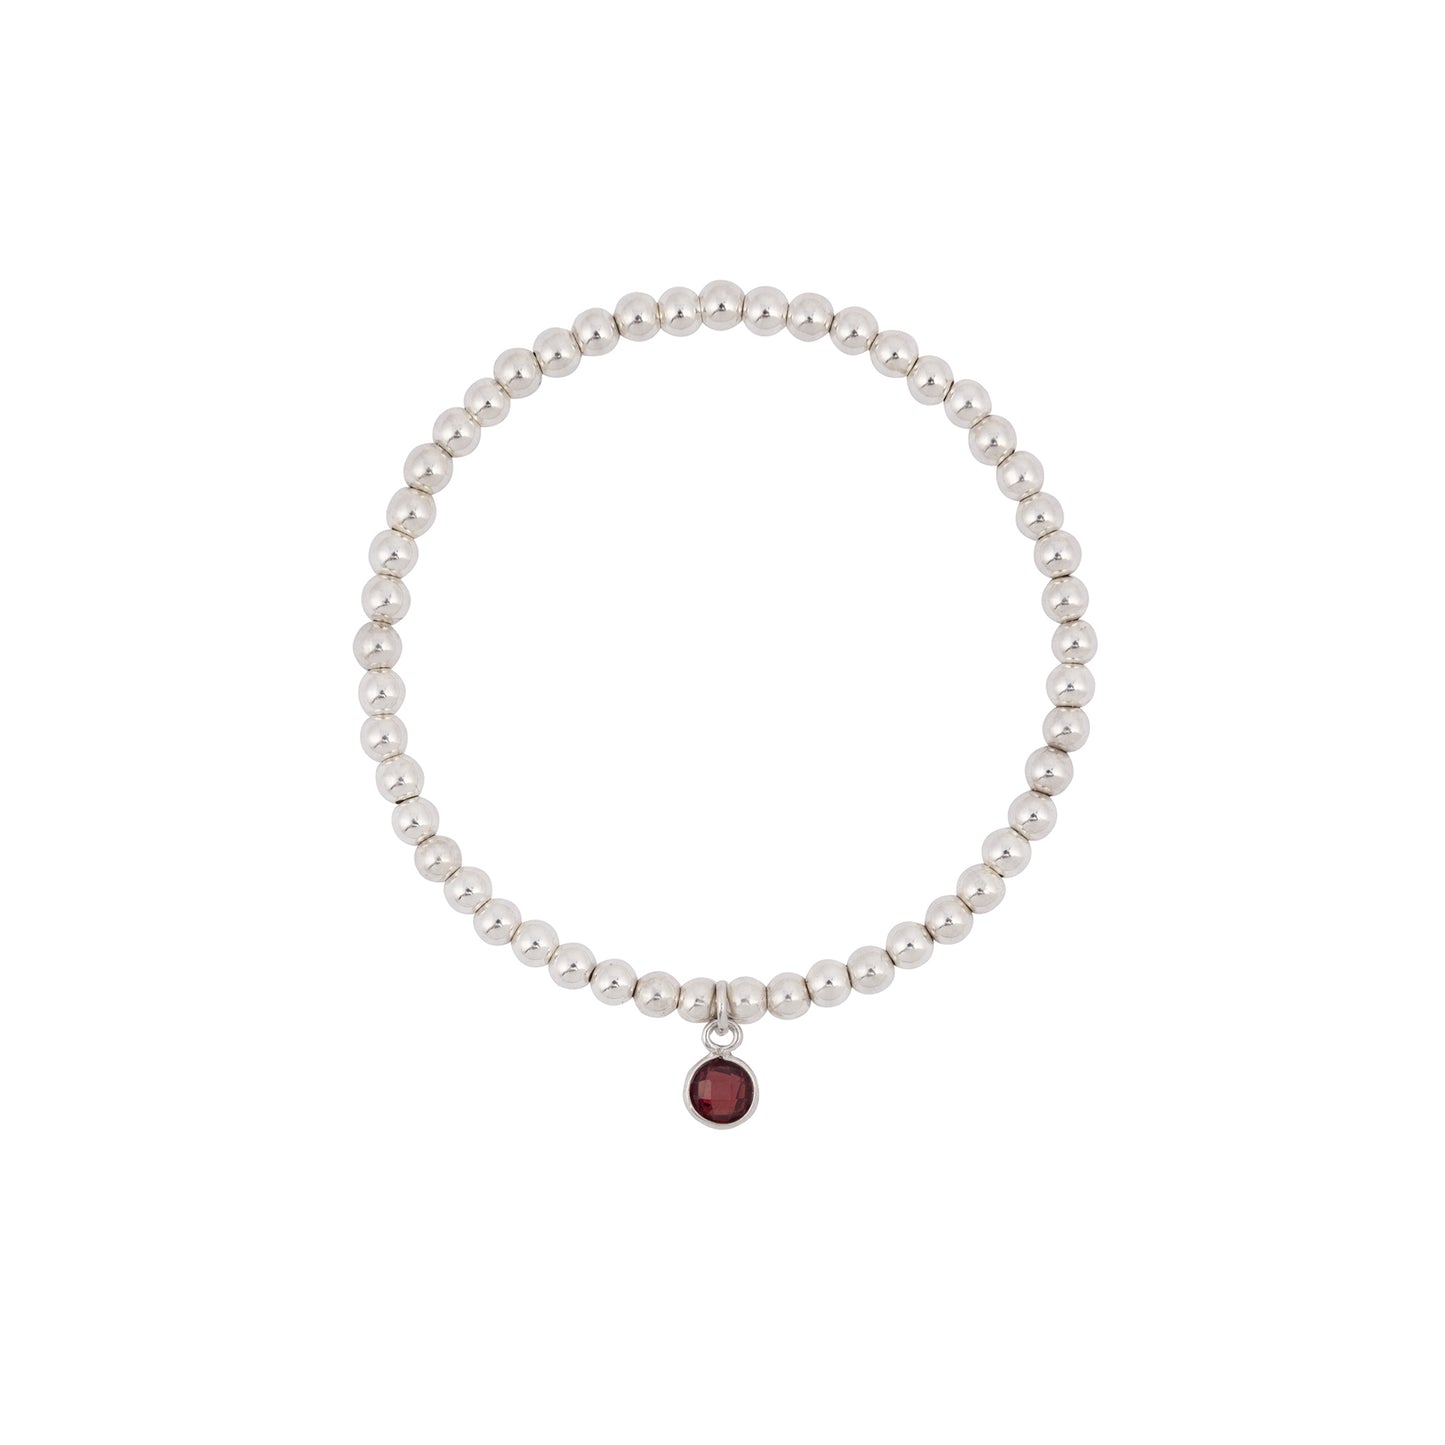 Photo of a Made Here with Love Garnet Birthstone Bracelet, composed of small, round, sterling silver beads. The bracelet features a single dangling January birthstone gemstone charm with a round, deep red gem set in a silver frame. The white background highlights the jewelry perfectly.